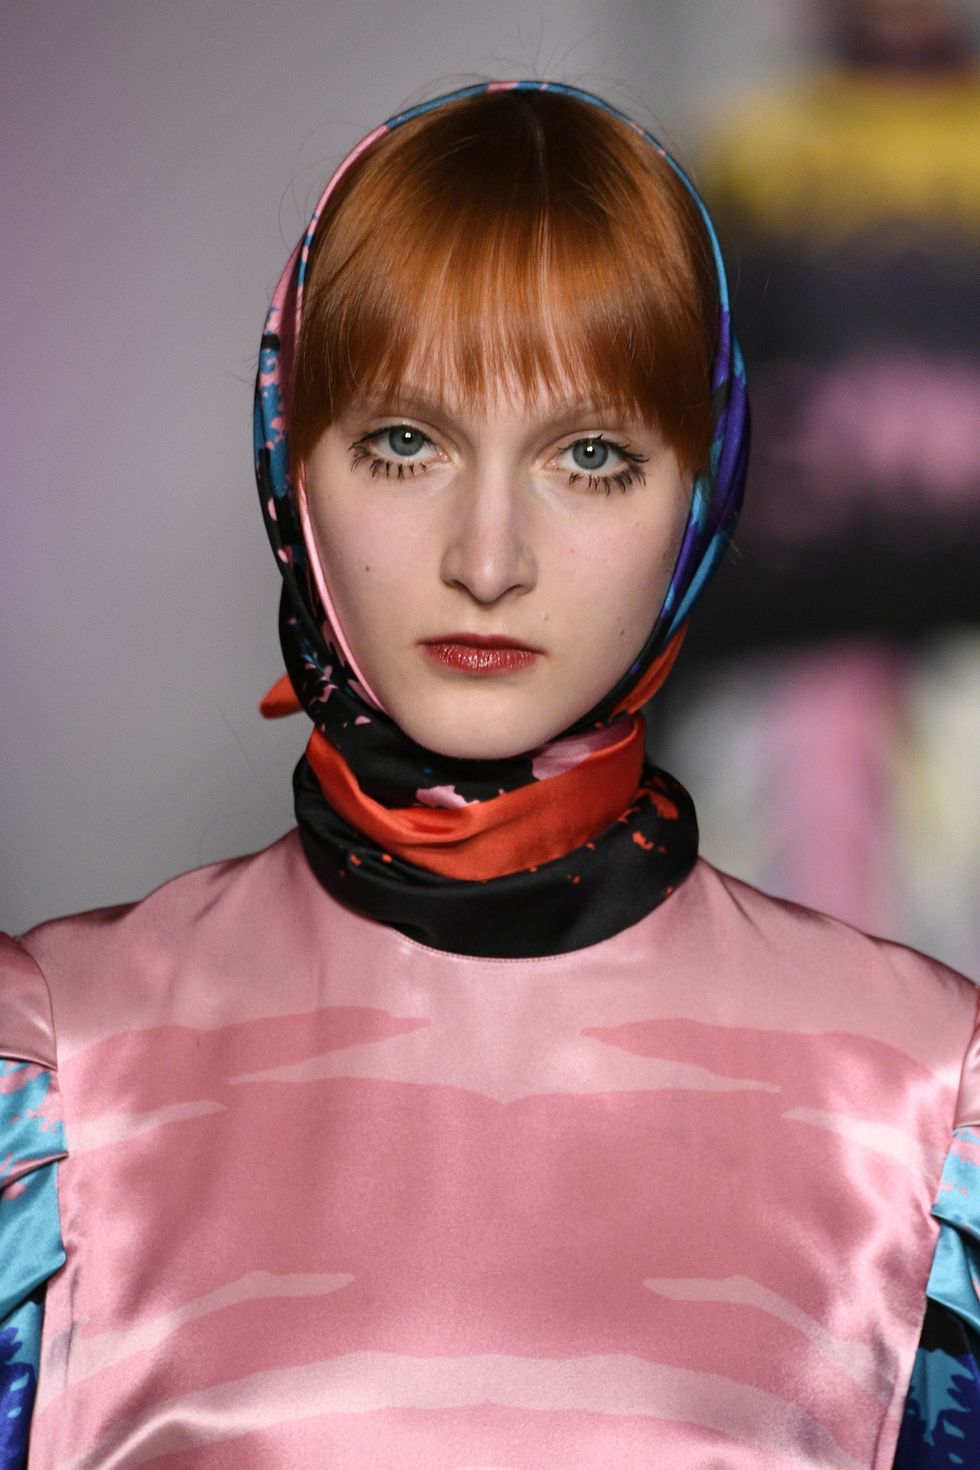 MILAN, ITALY - FEBRUARY 26:  A model, hat detail, walks the runway at the MSGM show during Milan Fashion Week Fall/Winter 2017/18 on February 26, 2017 in Milan, Italy.  (Photo by Pietro D'aprano/Getty Images)